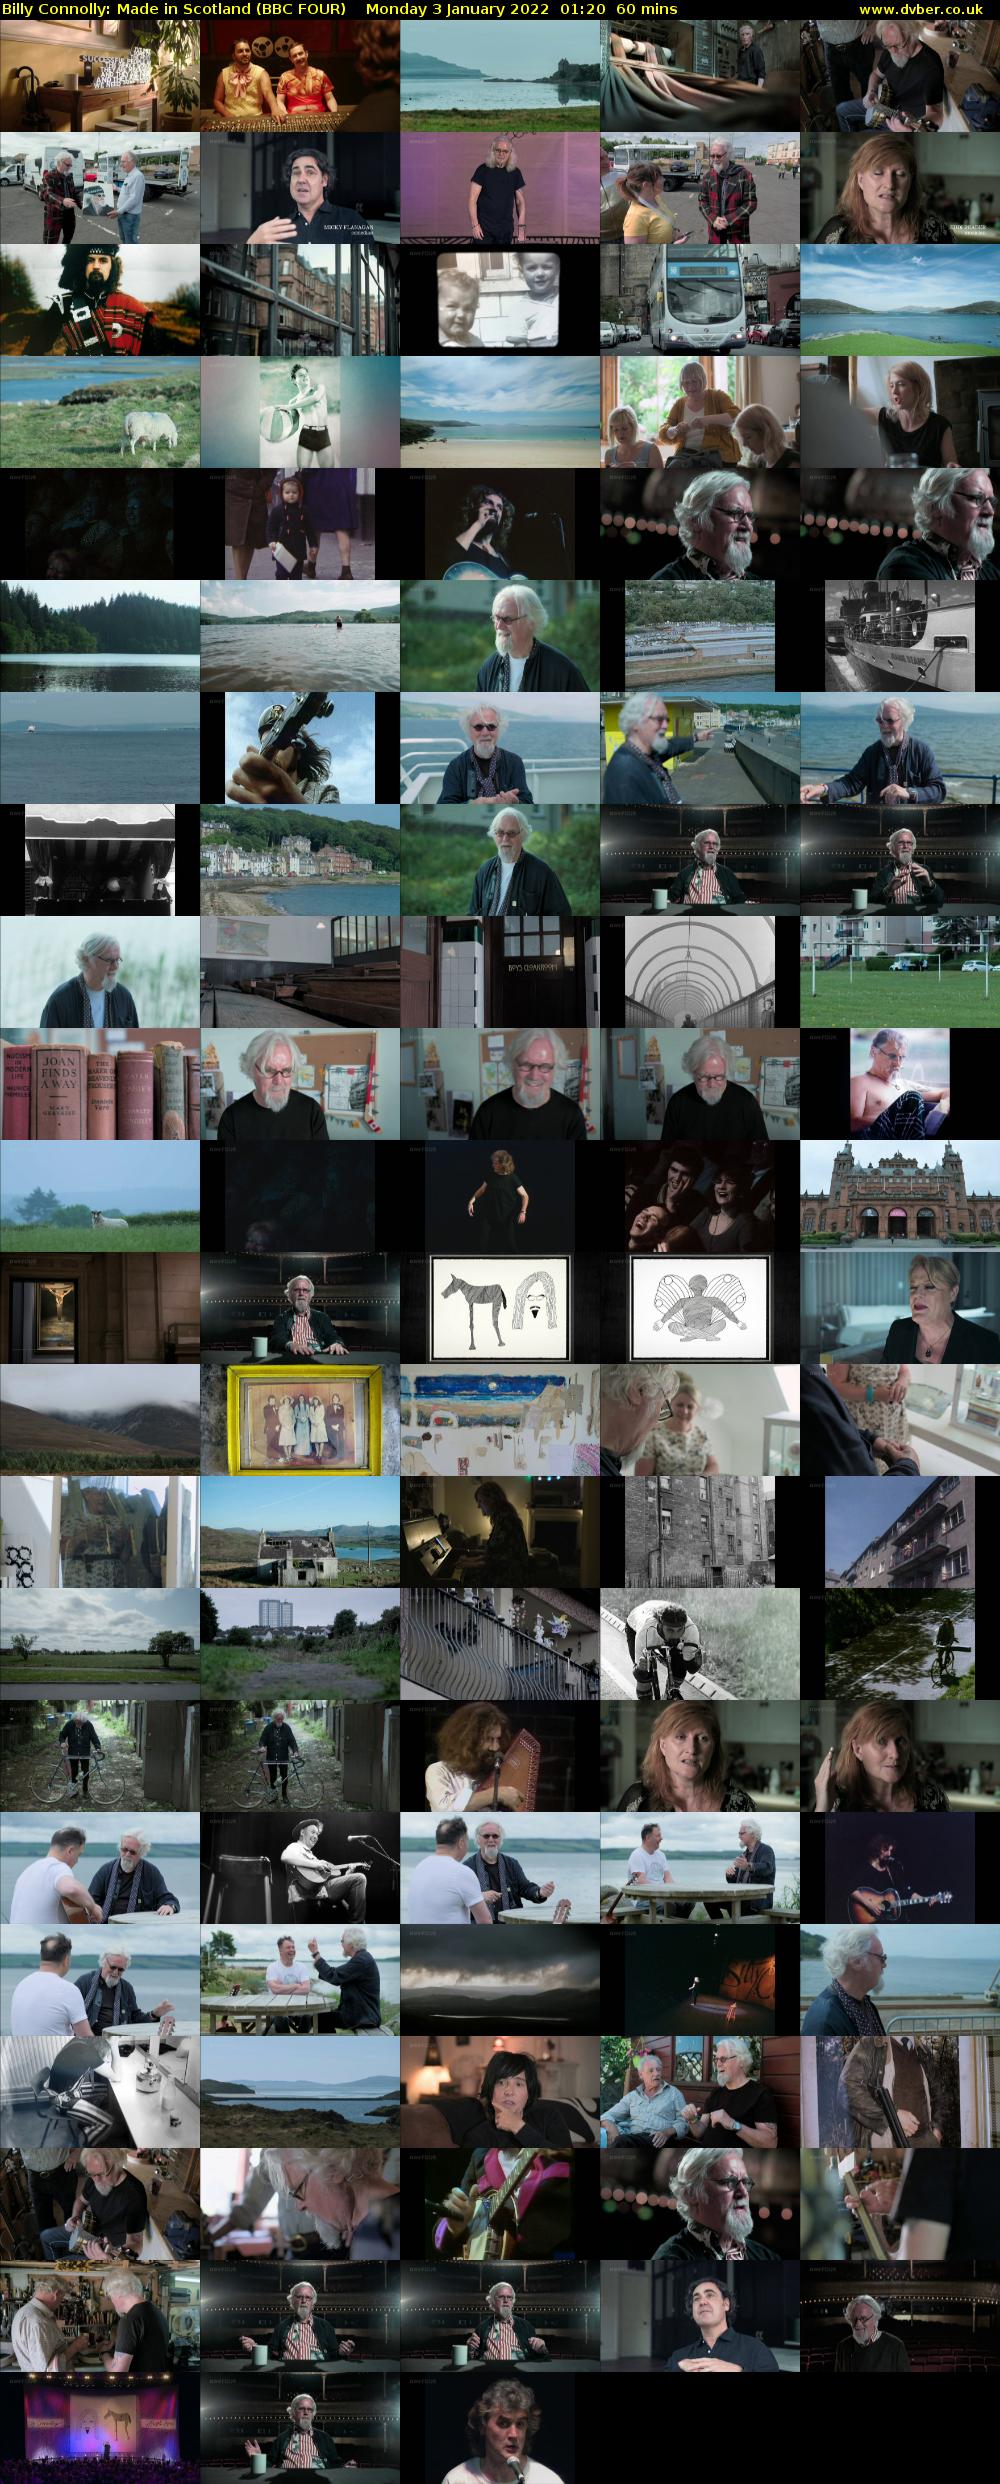 Billy Connolly: Made in Scotland (BBC FOUR) Monday 3 January 2022 01:20 - 02:20